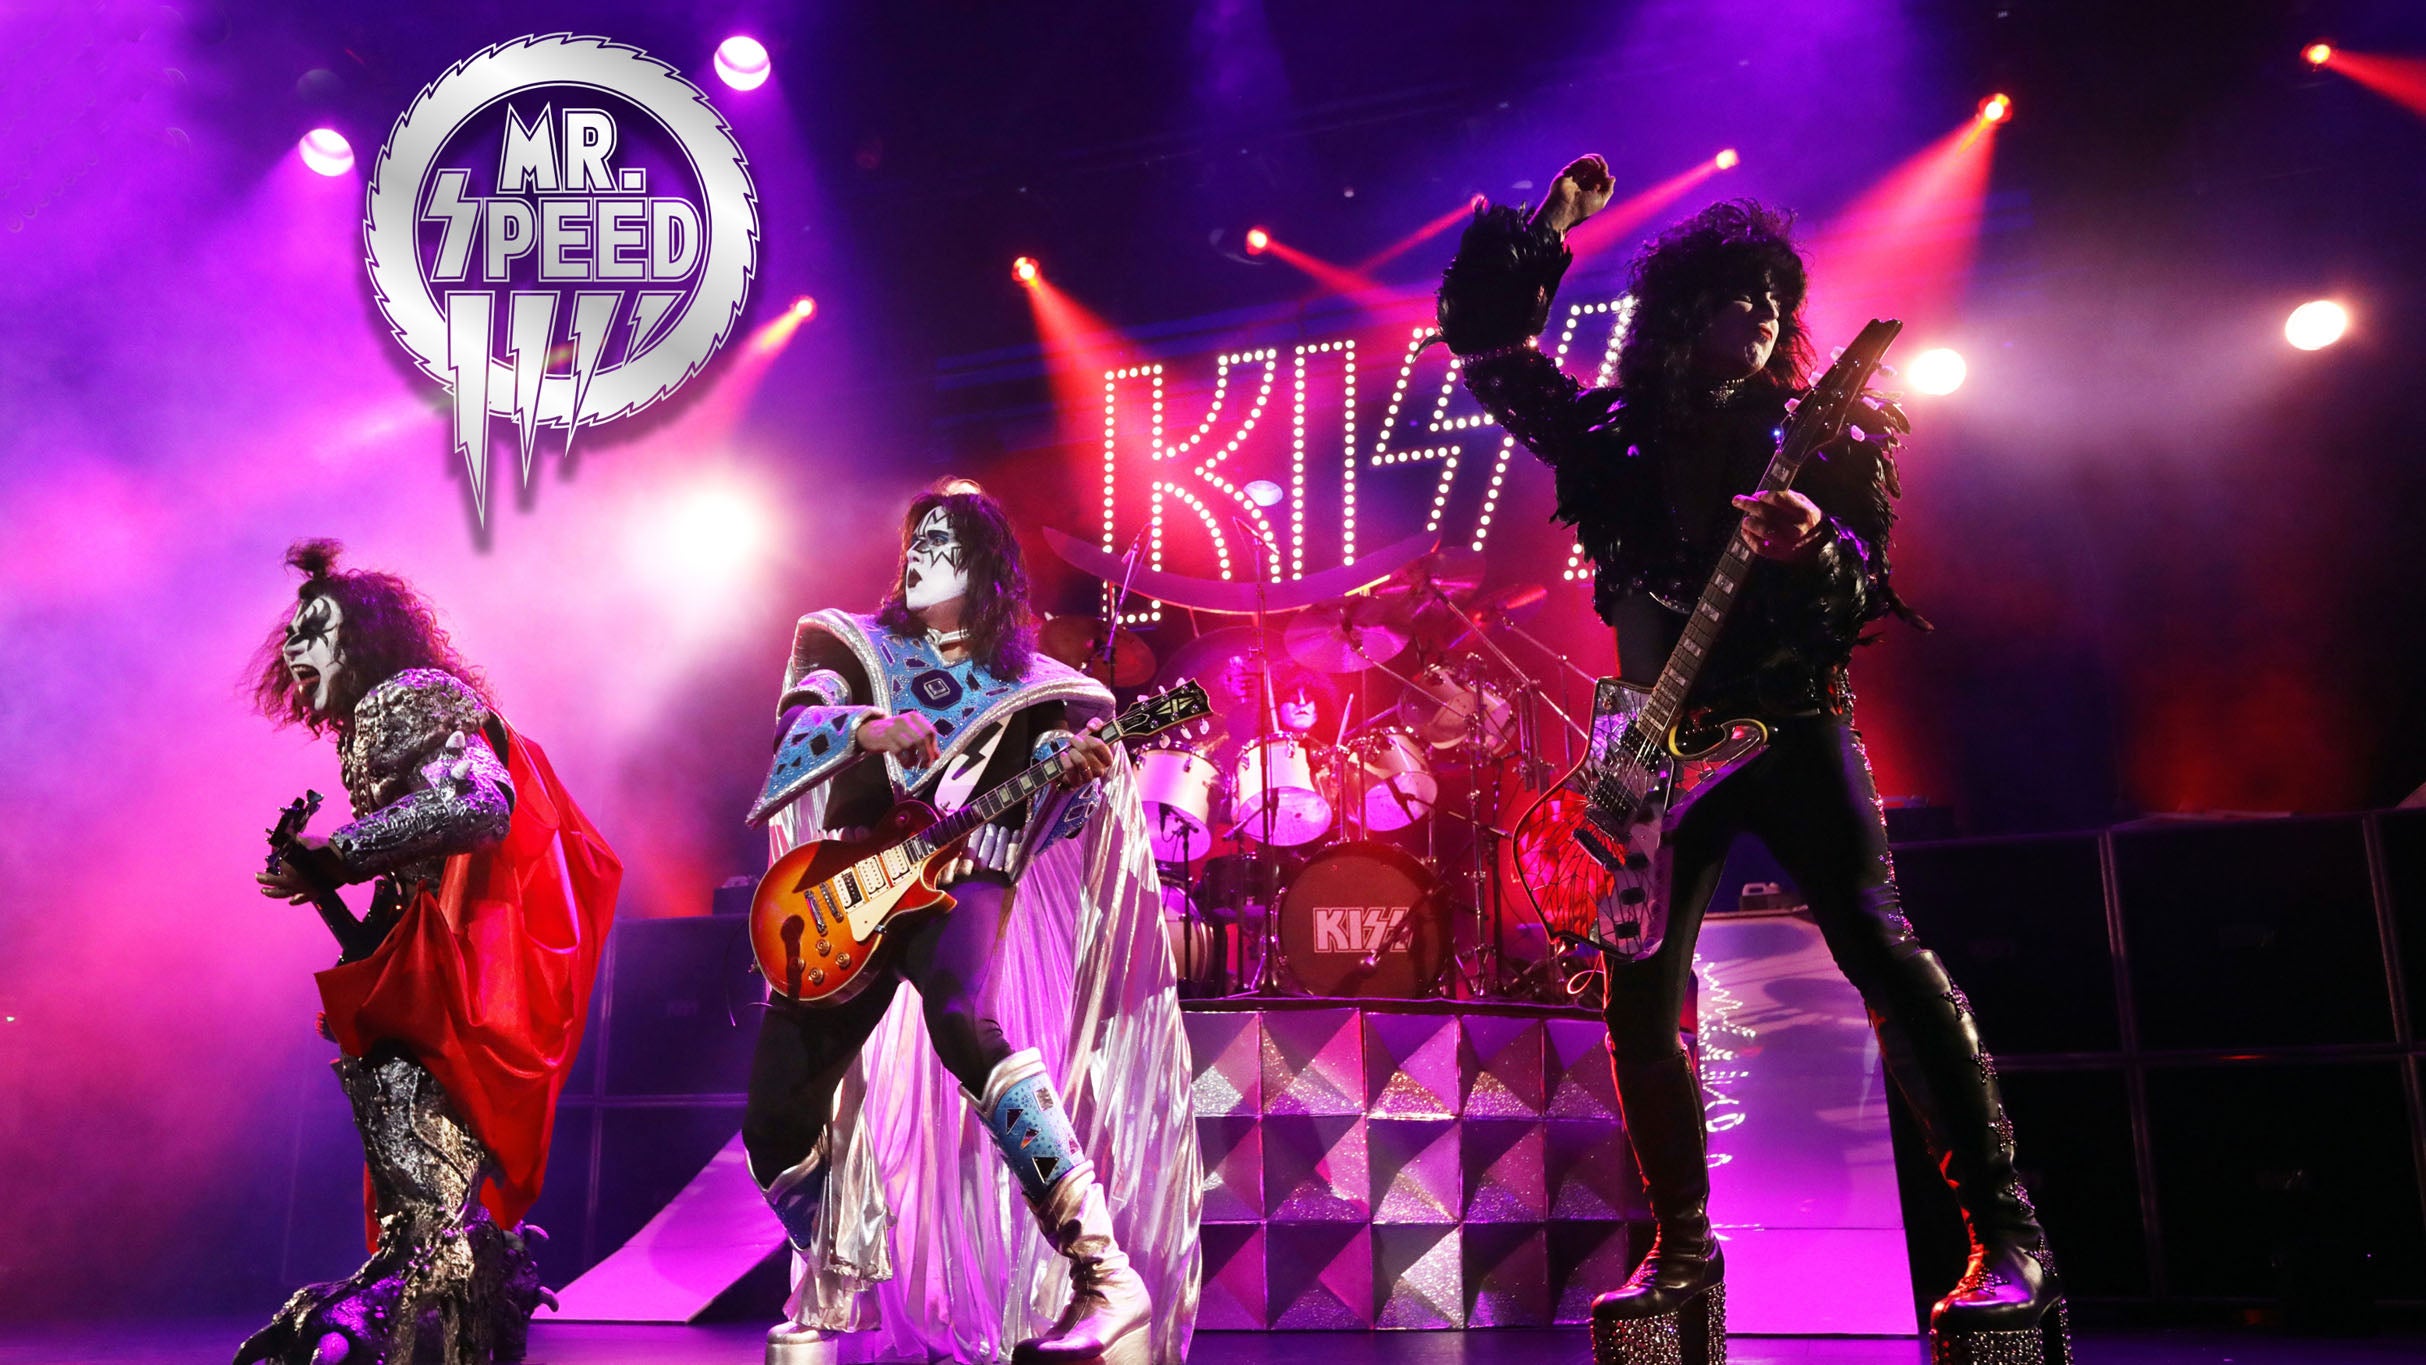 Mr. Speed - A Tribute to Kiss in Cleveland promo photo for HOB Foundation Room Member presale offer code